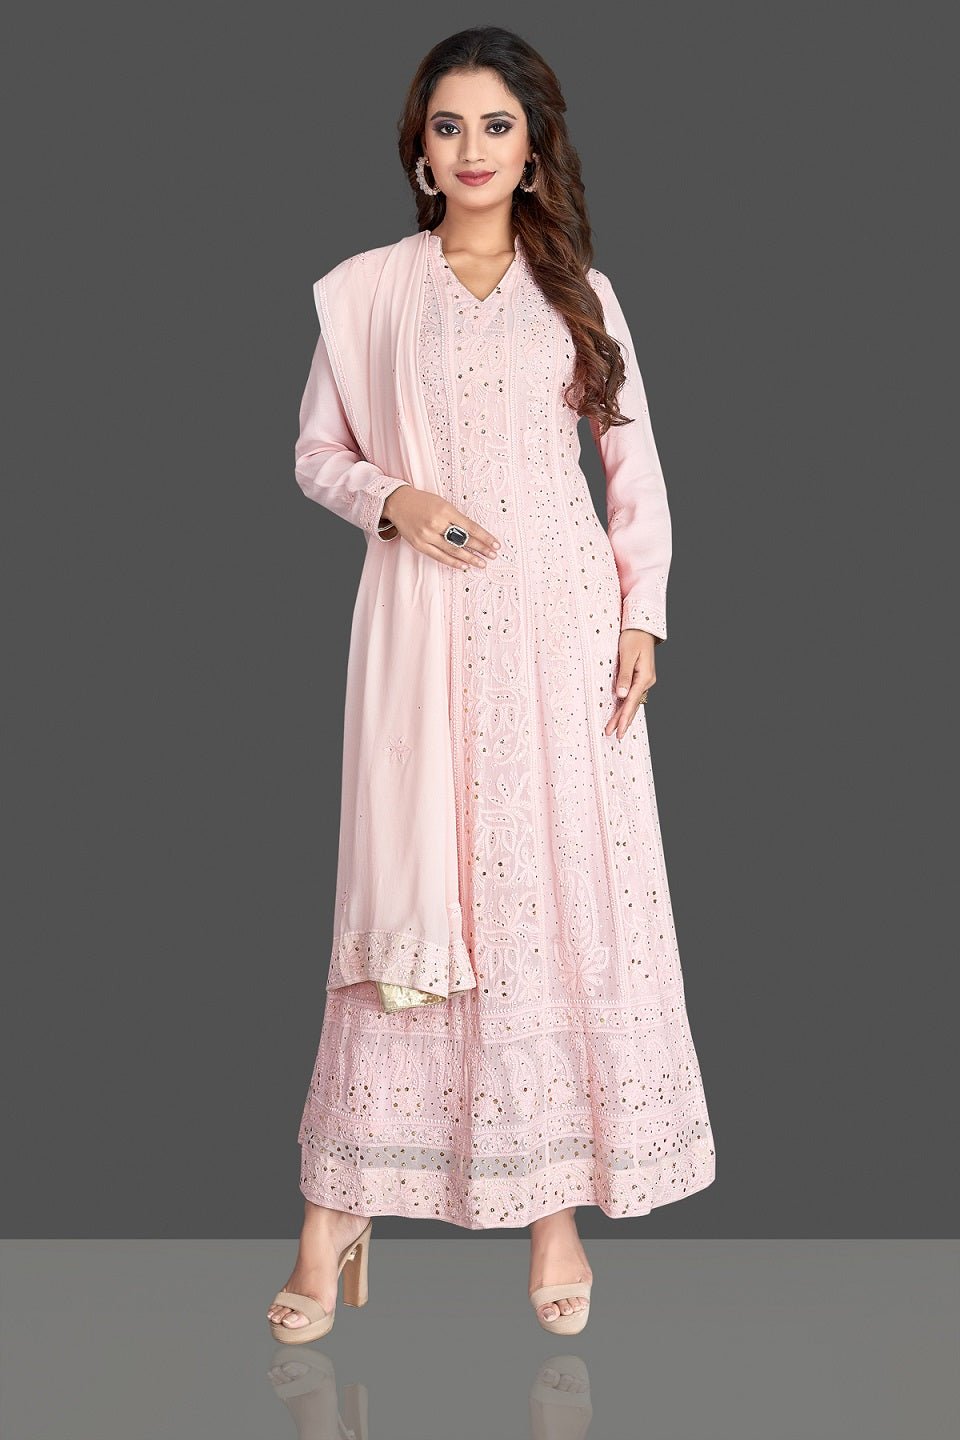 Shop beautiful powder pink Lucknowi chikankari work georgette Anarkali suit online in USA. Flaunt your sartorial choice with beautiful embroidered Anarkali, sharara suits, designer lehengas, designer gowns from Pure Elegance Indian saree store in USA.-full view\